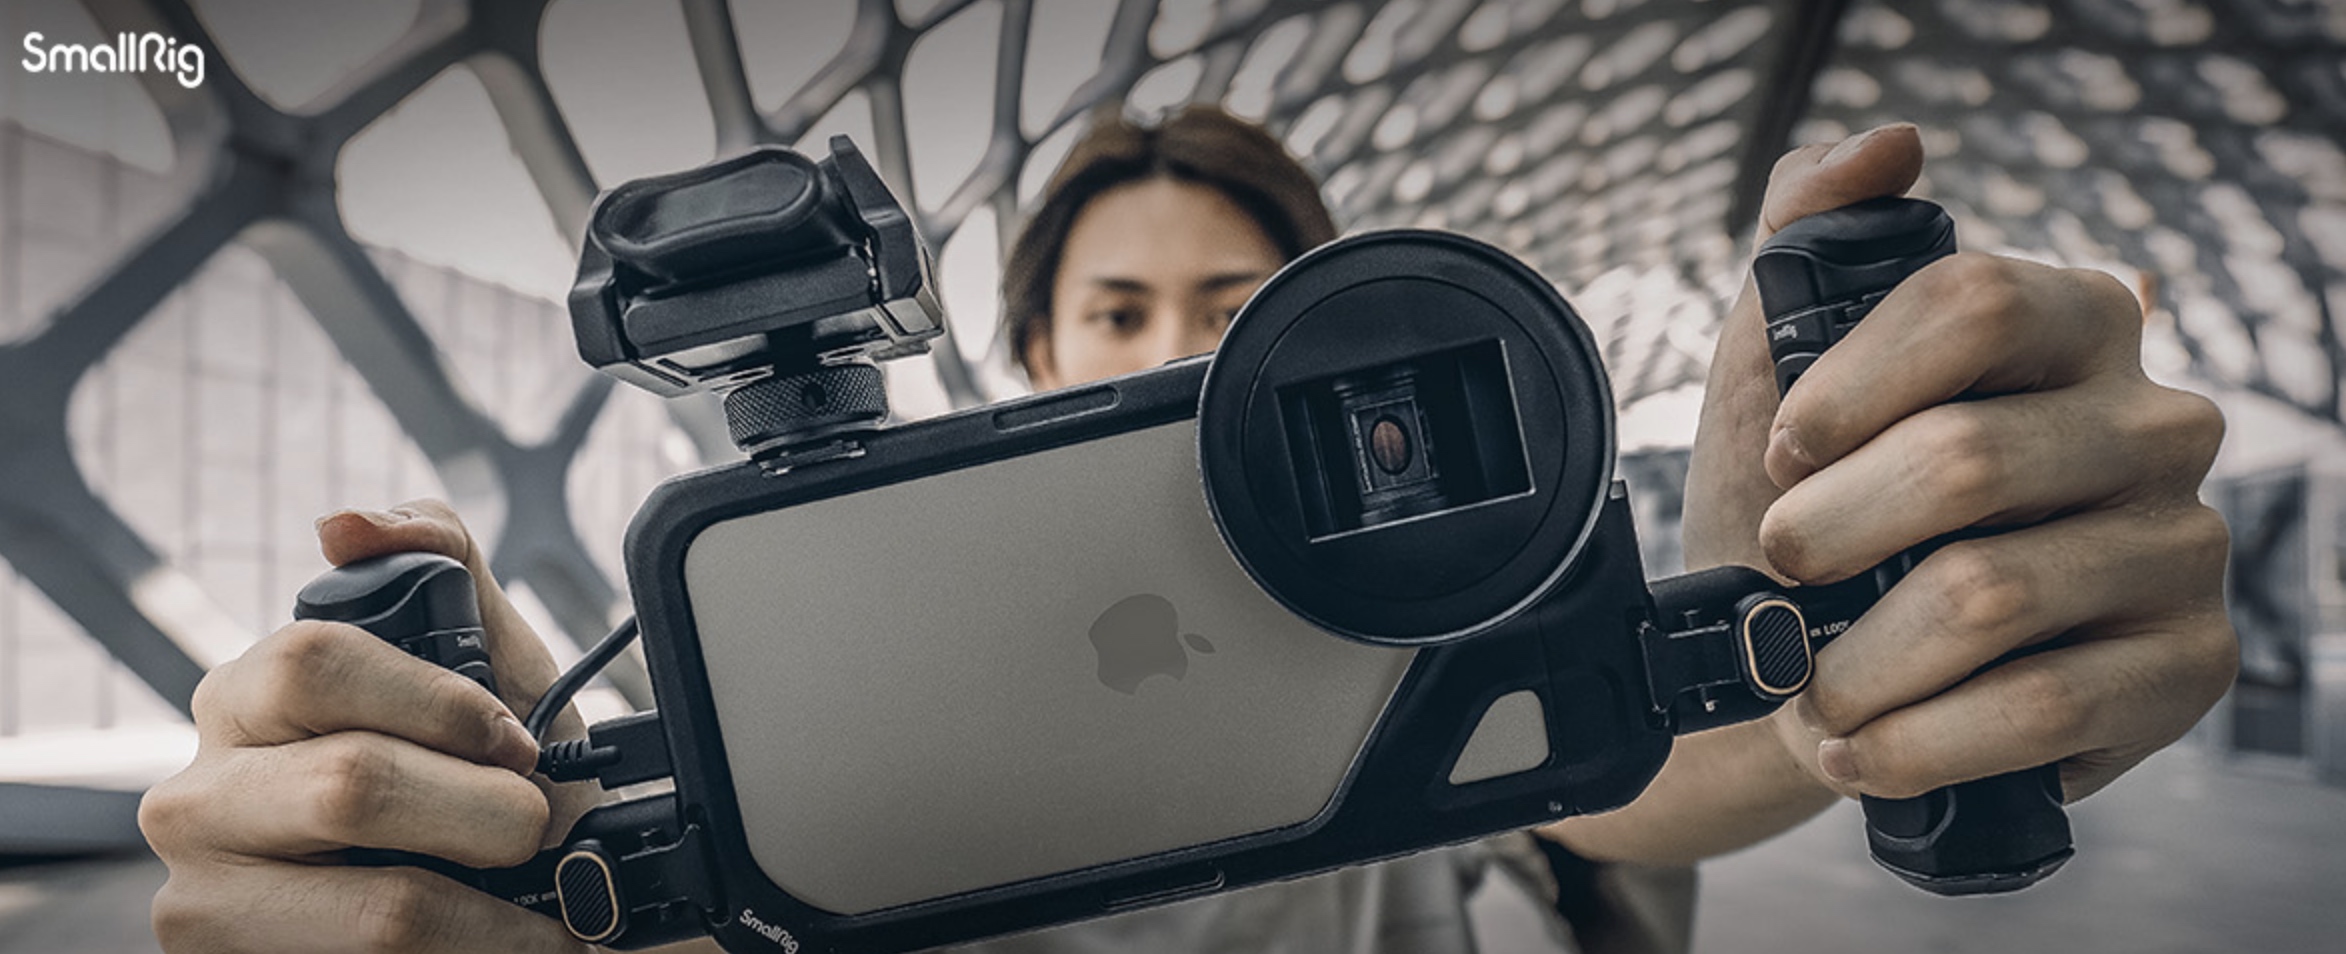 SmallRig Mobile Video Cage for the iPhone 15 Pro Max - Newsshooter